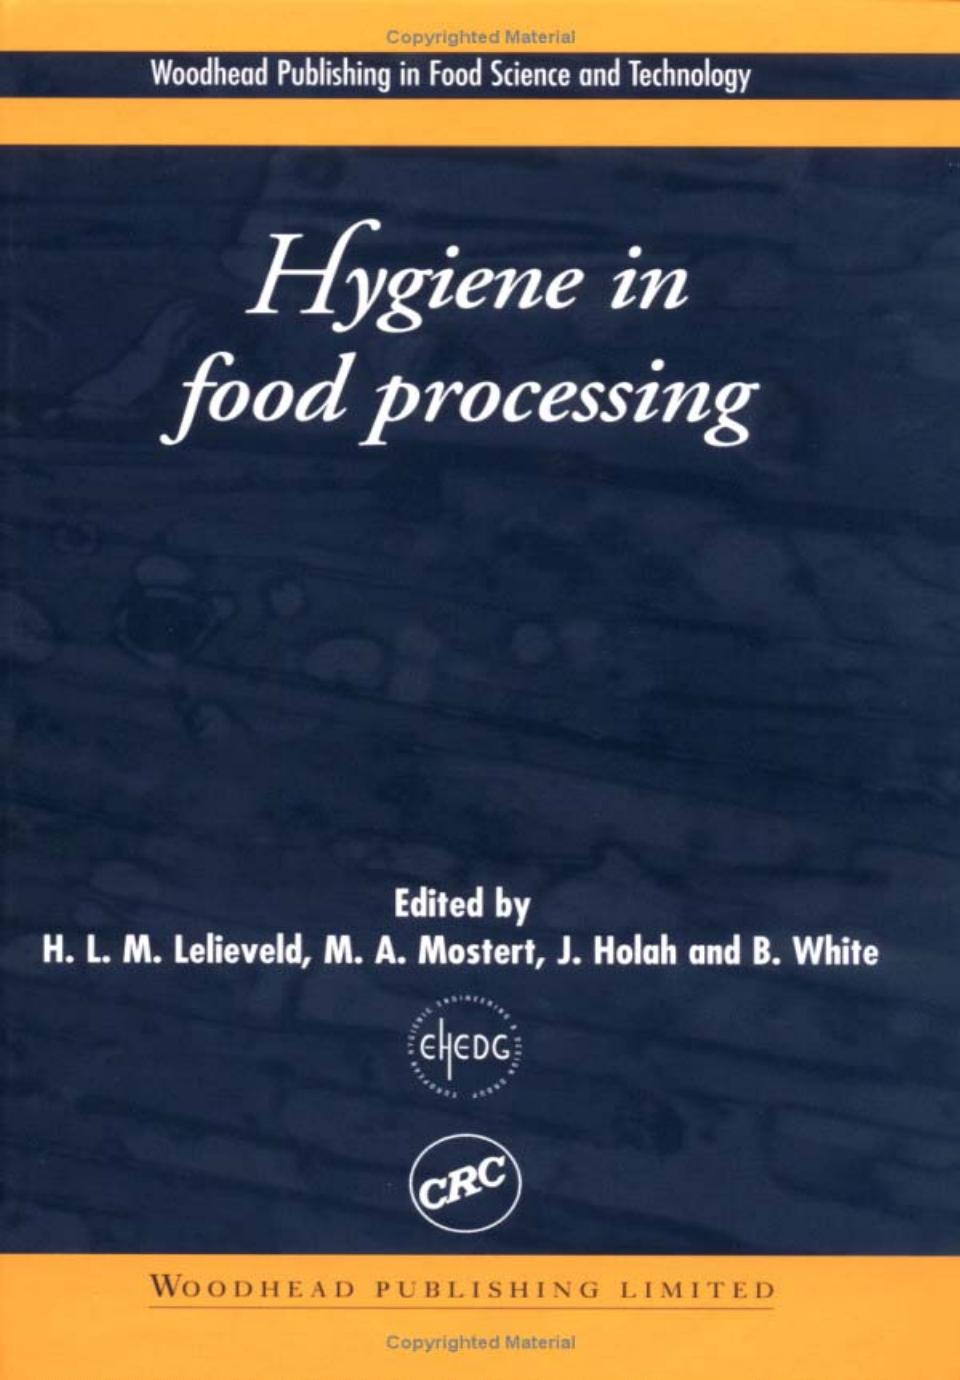 Hygiene in Food Processing: Principles and Practice